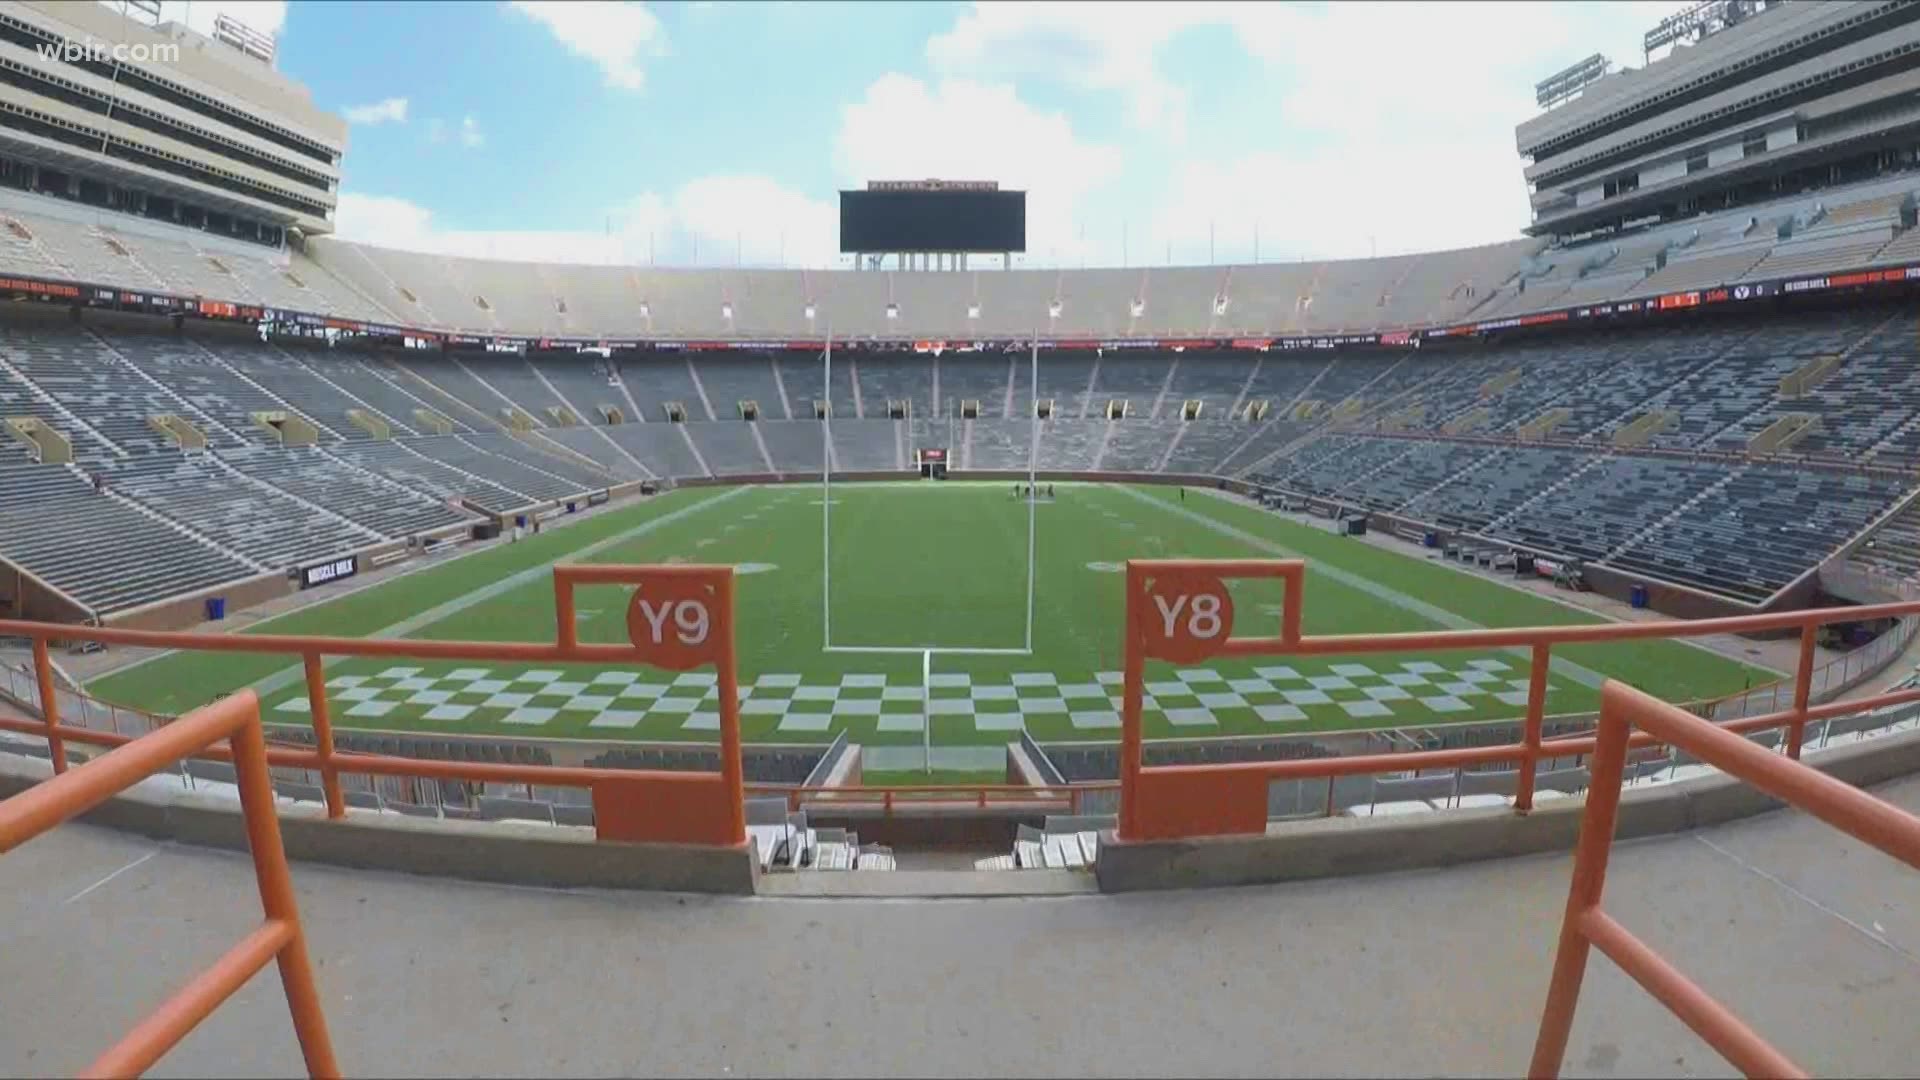 Single-game ticket sales opened today, just after launch seats were available for 5 home games at Neyland Stadium.